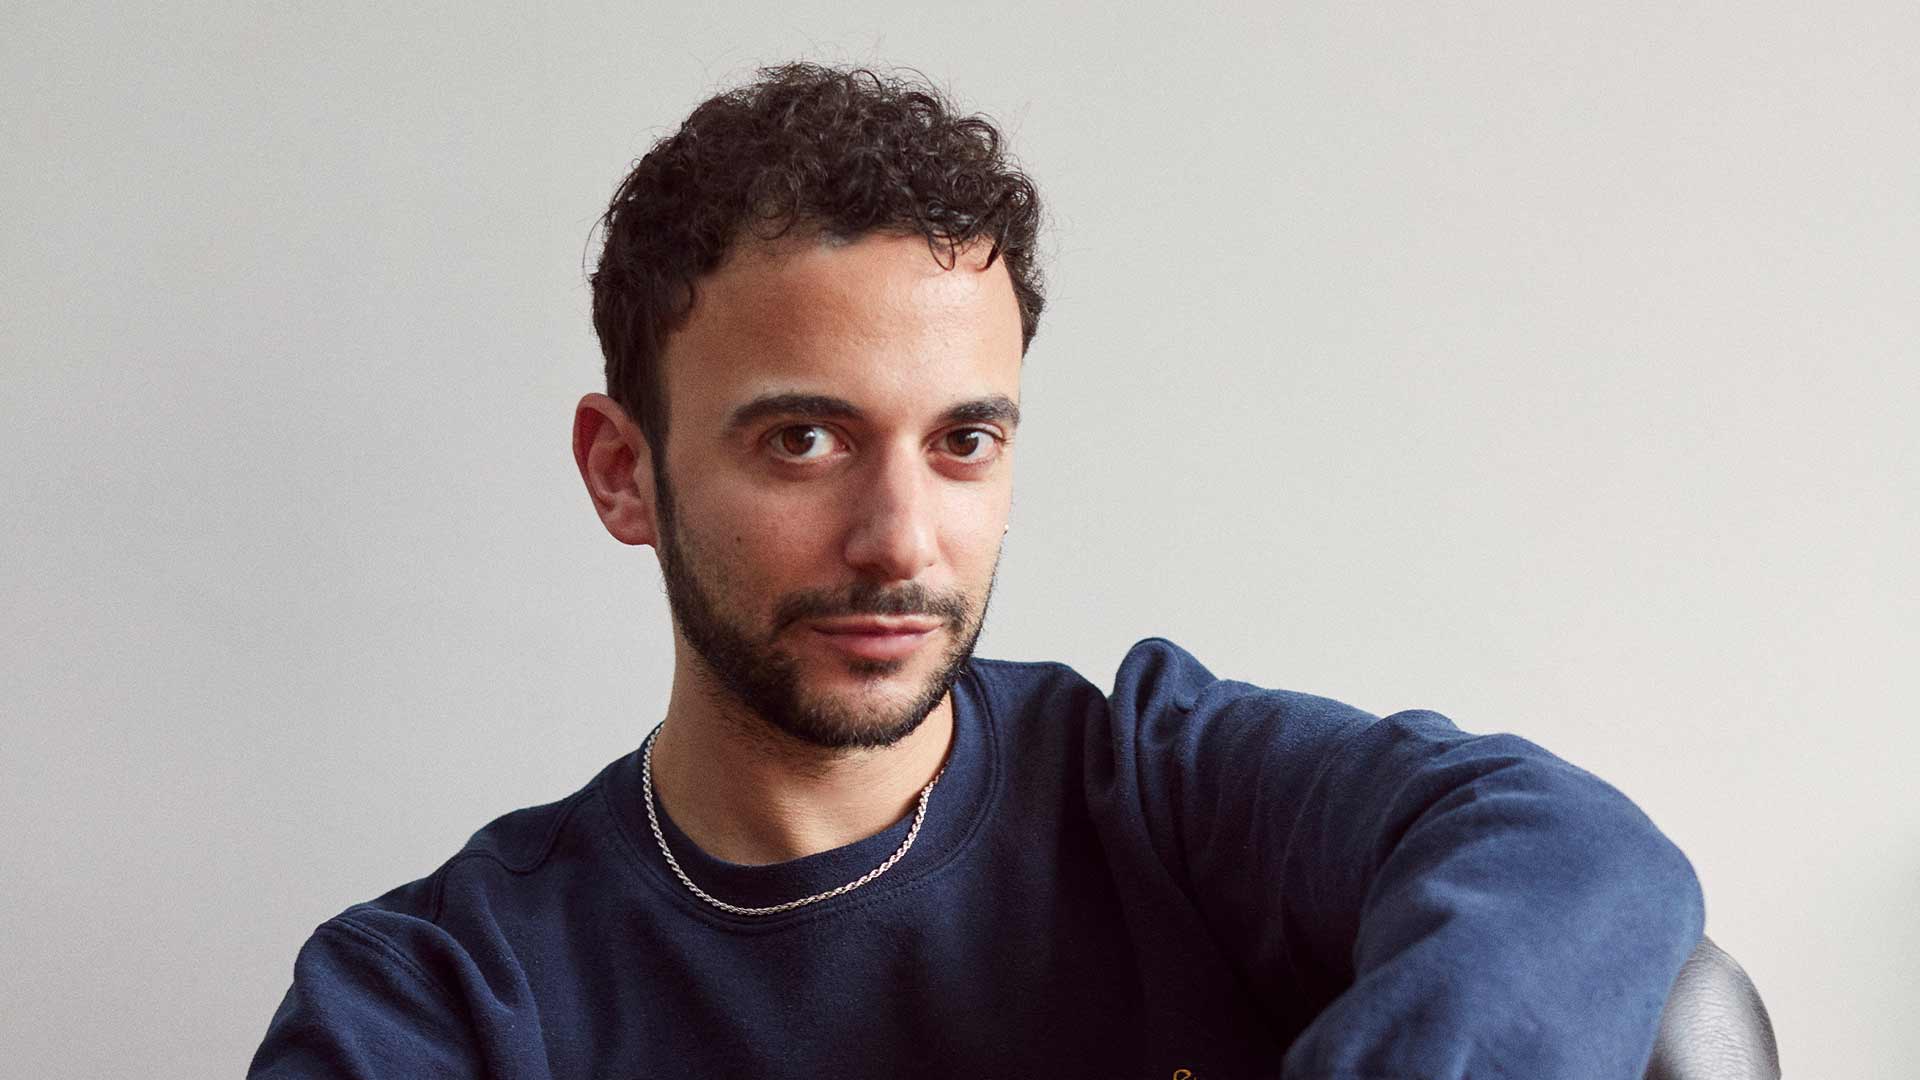 Marwan Kaabour chats about his book, The Queer Arab Glossary